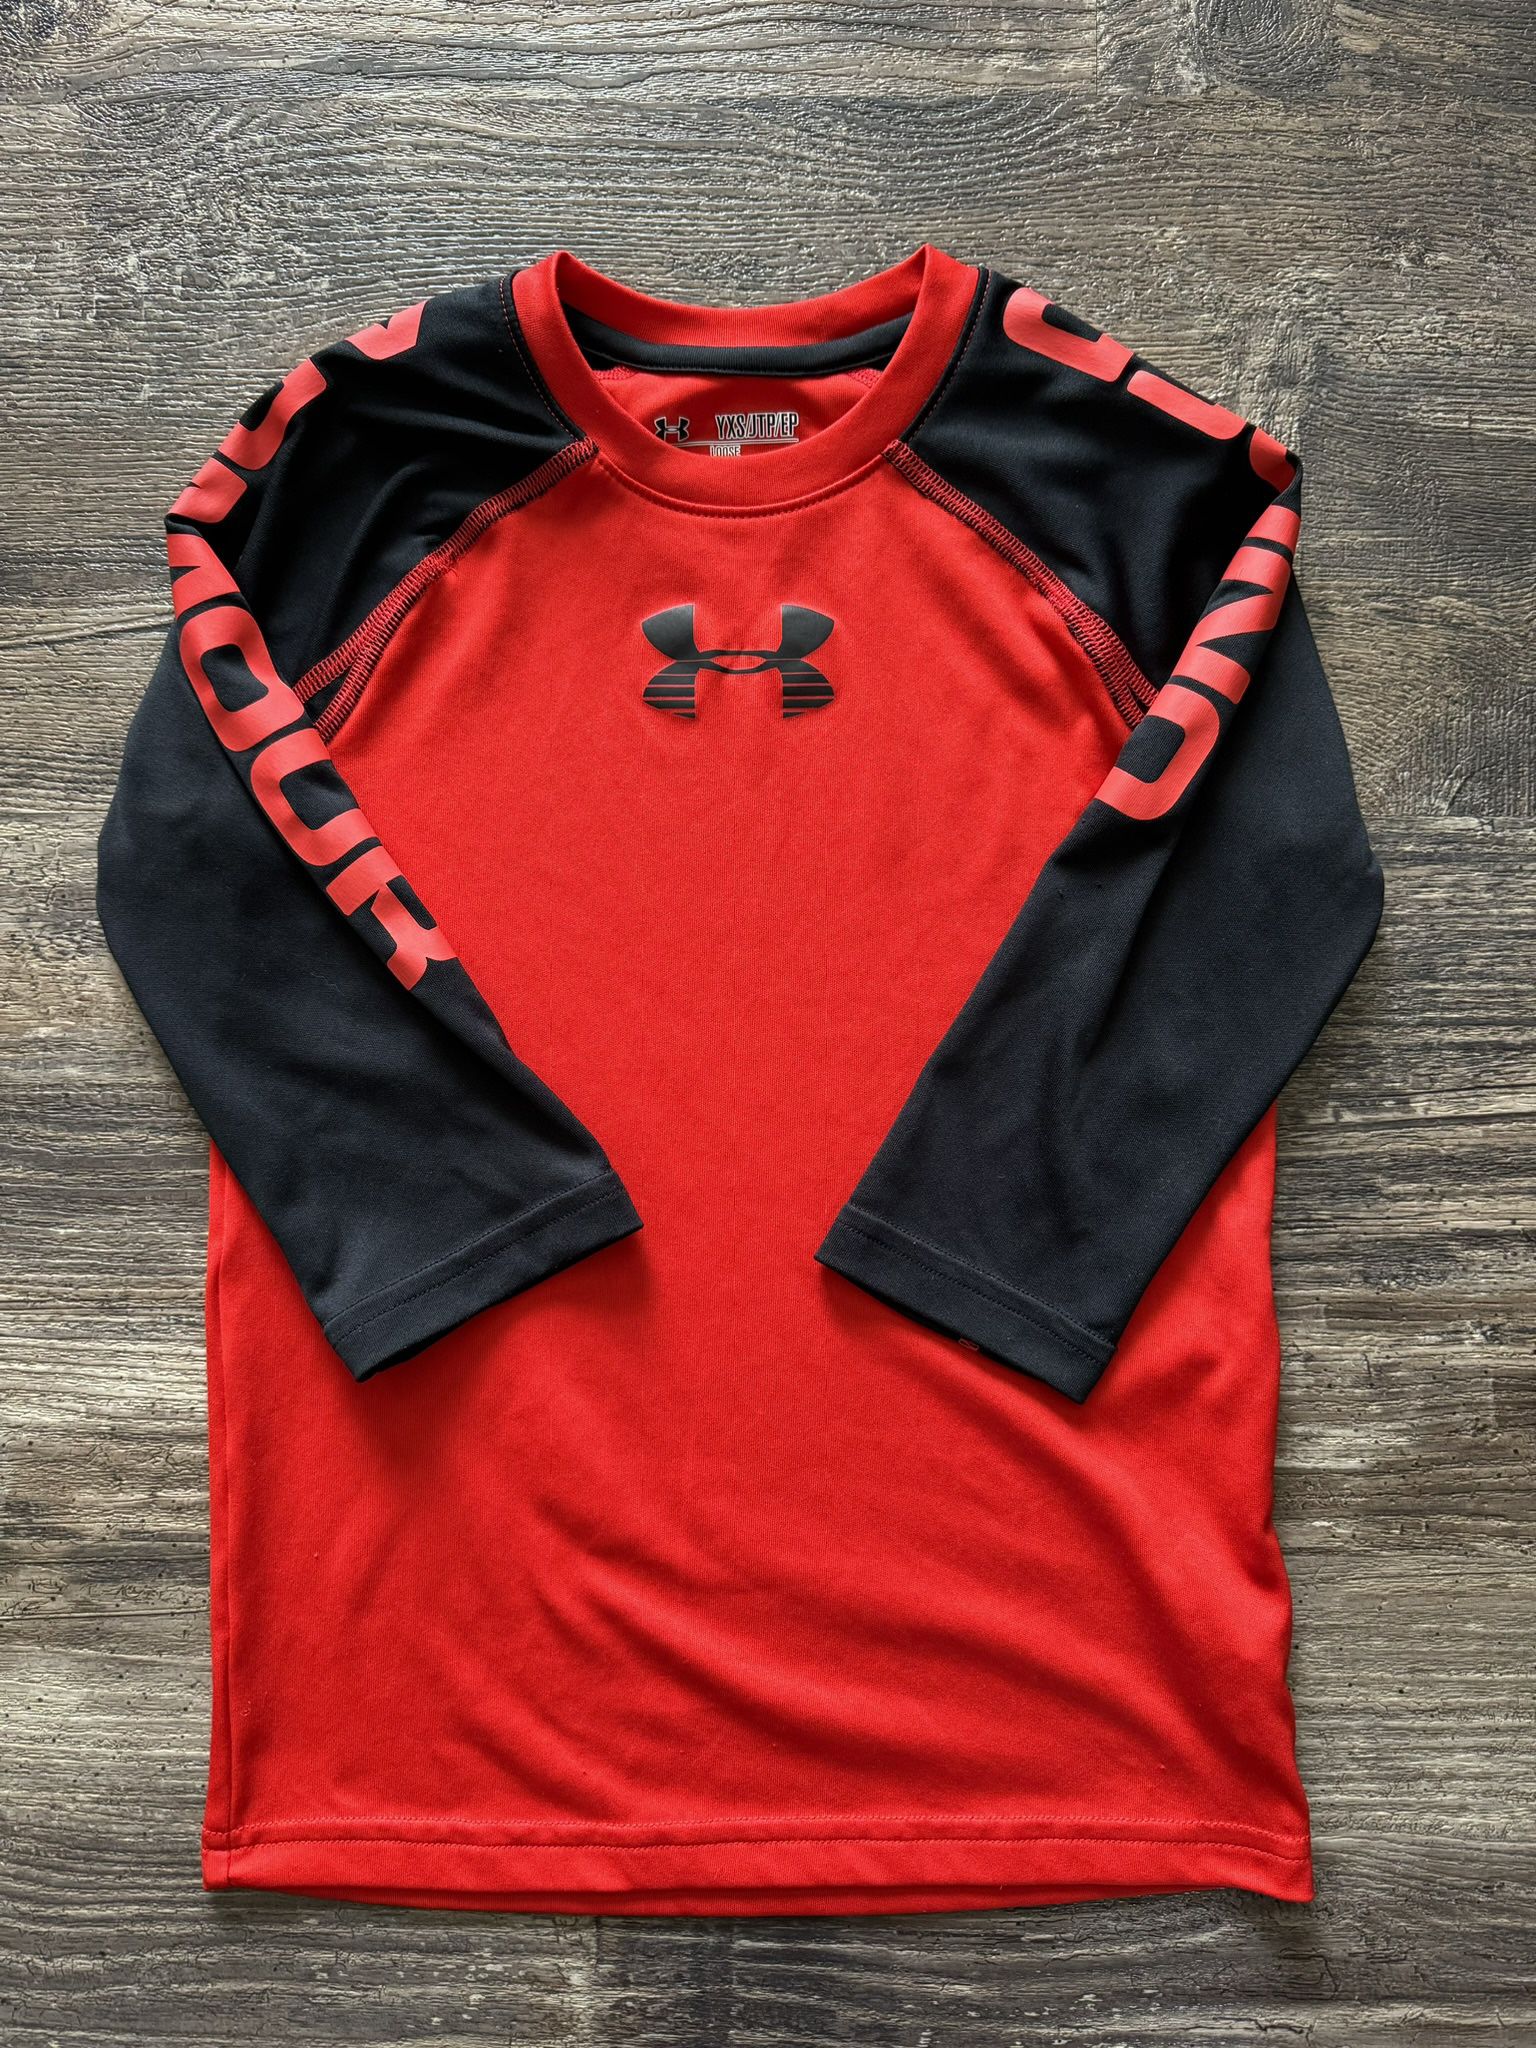 Youth Size 5/6 Under Armour 3/4 Sleeve Shirt